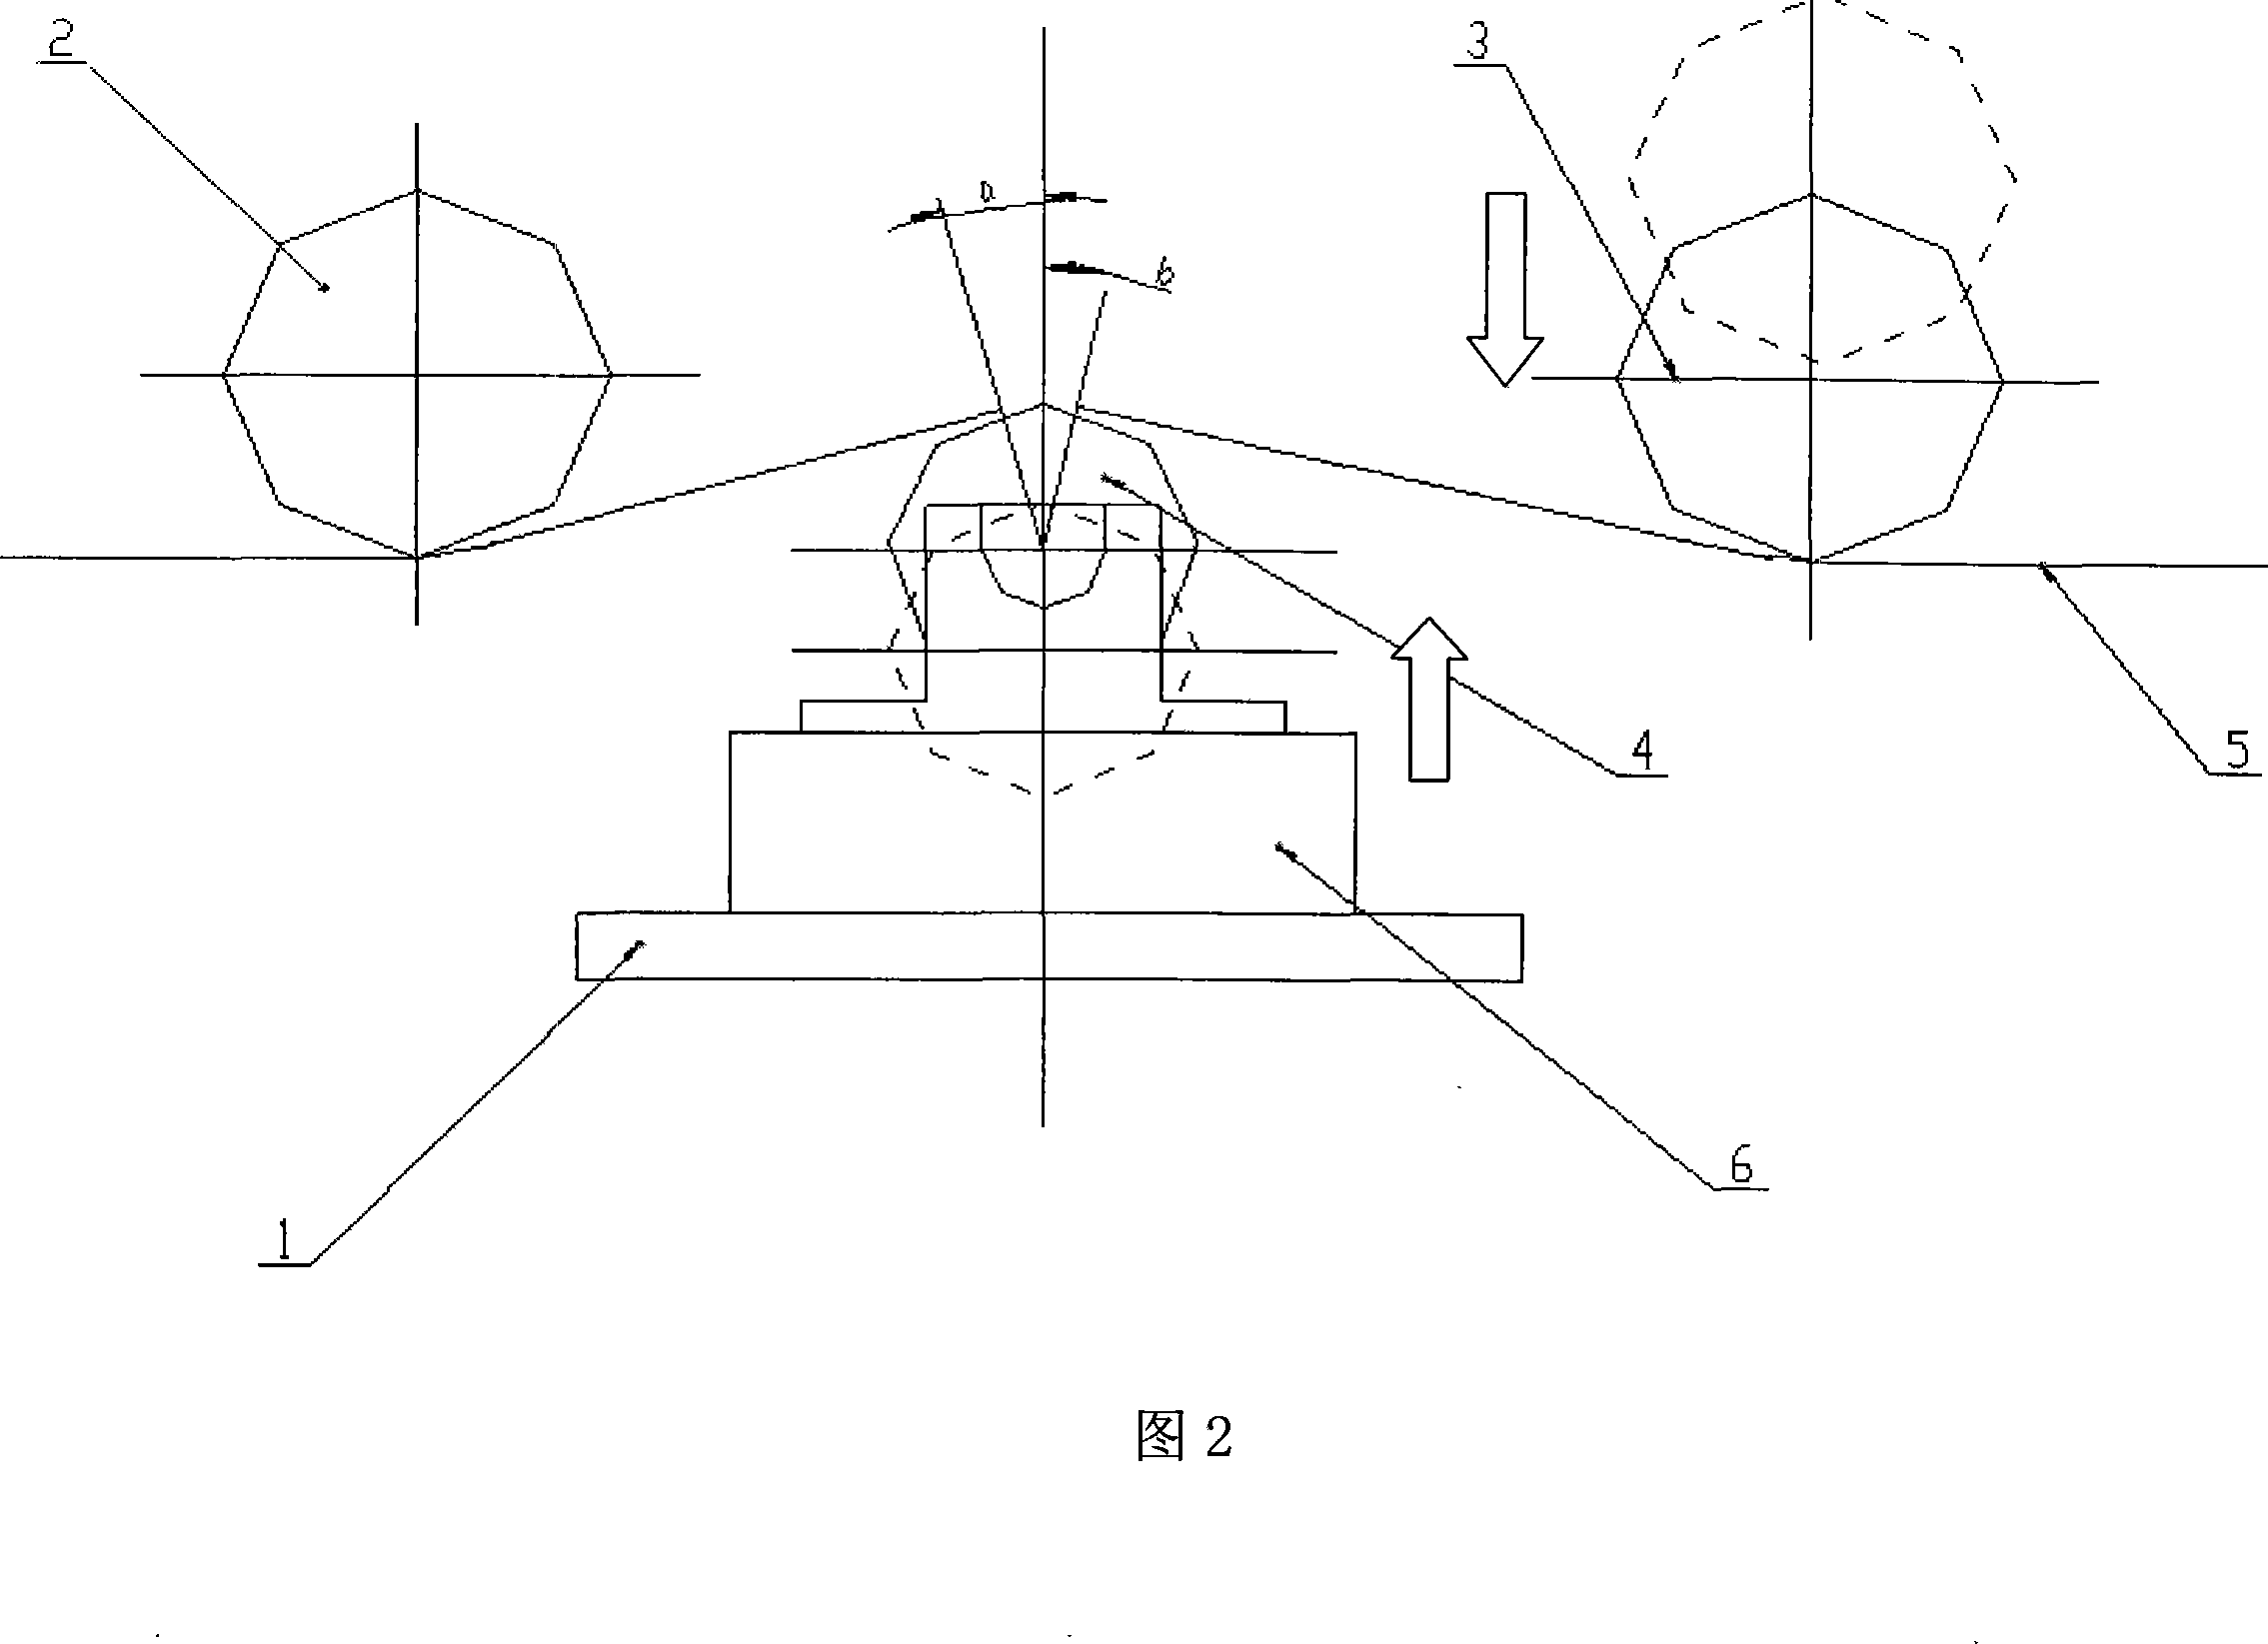 On-line tension force detecting mechanism